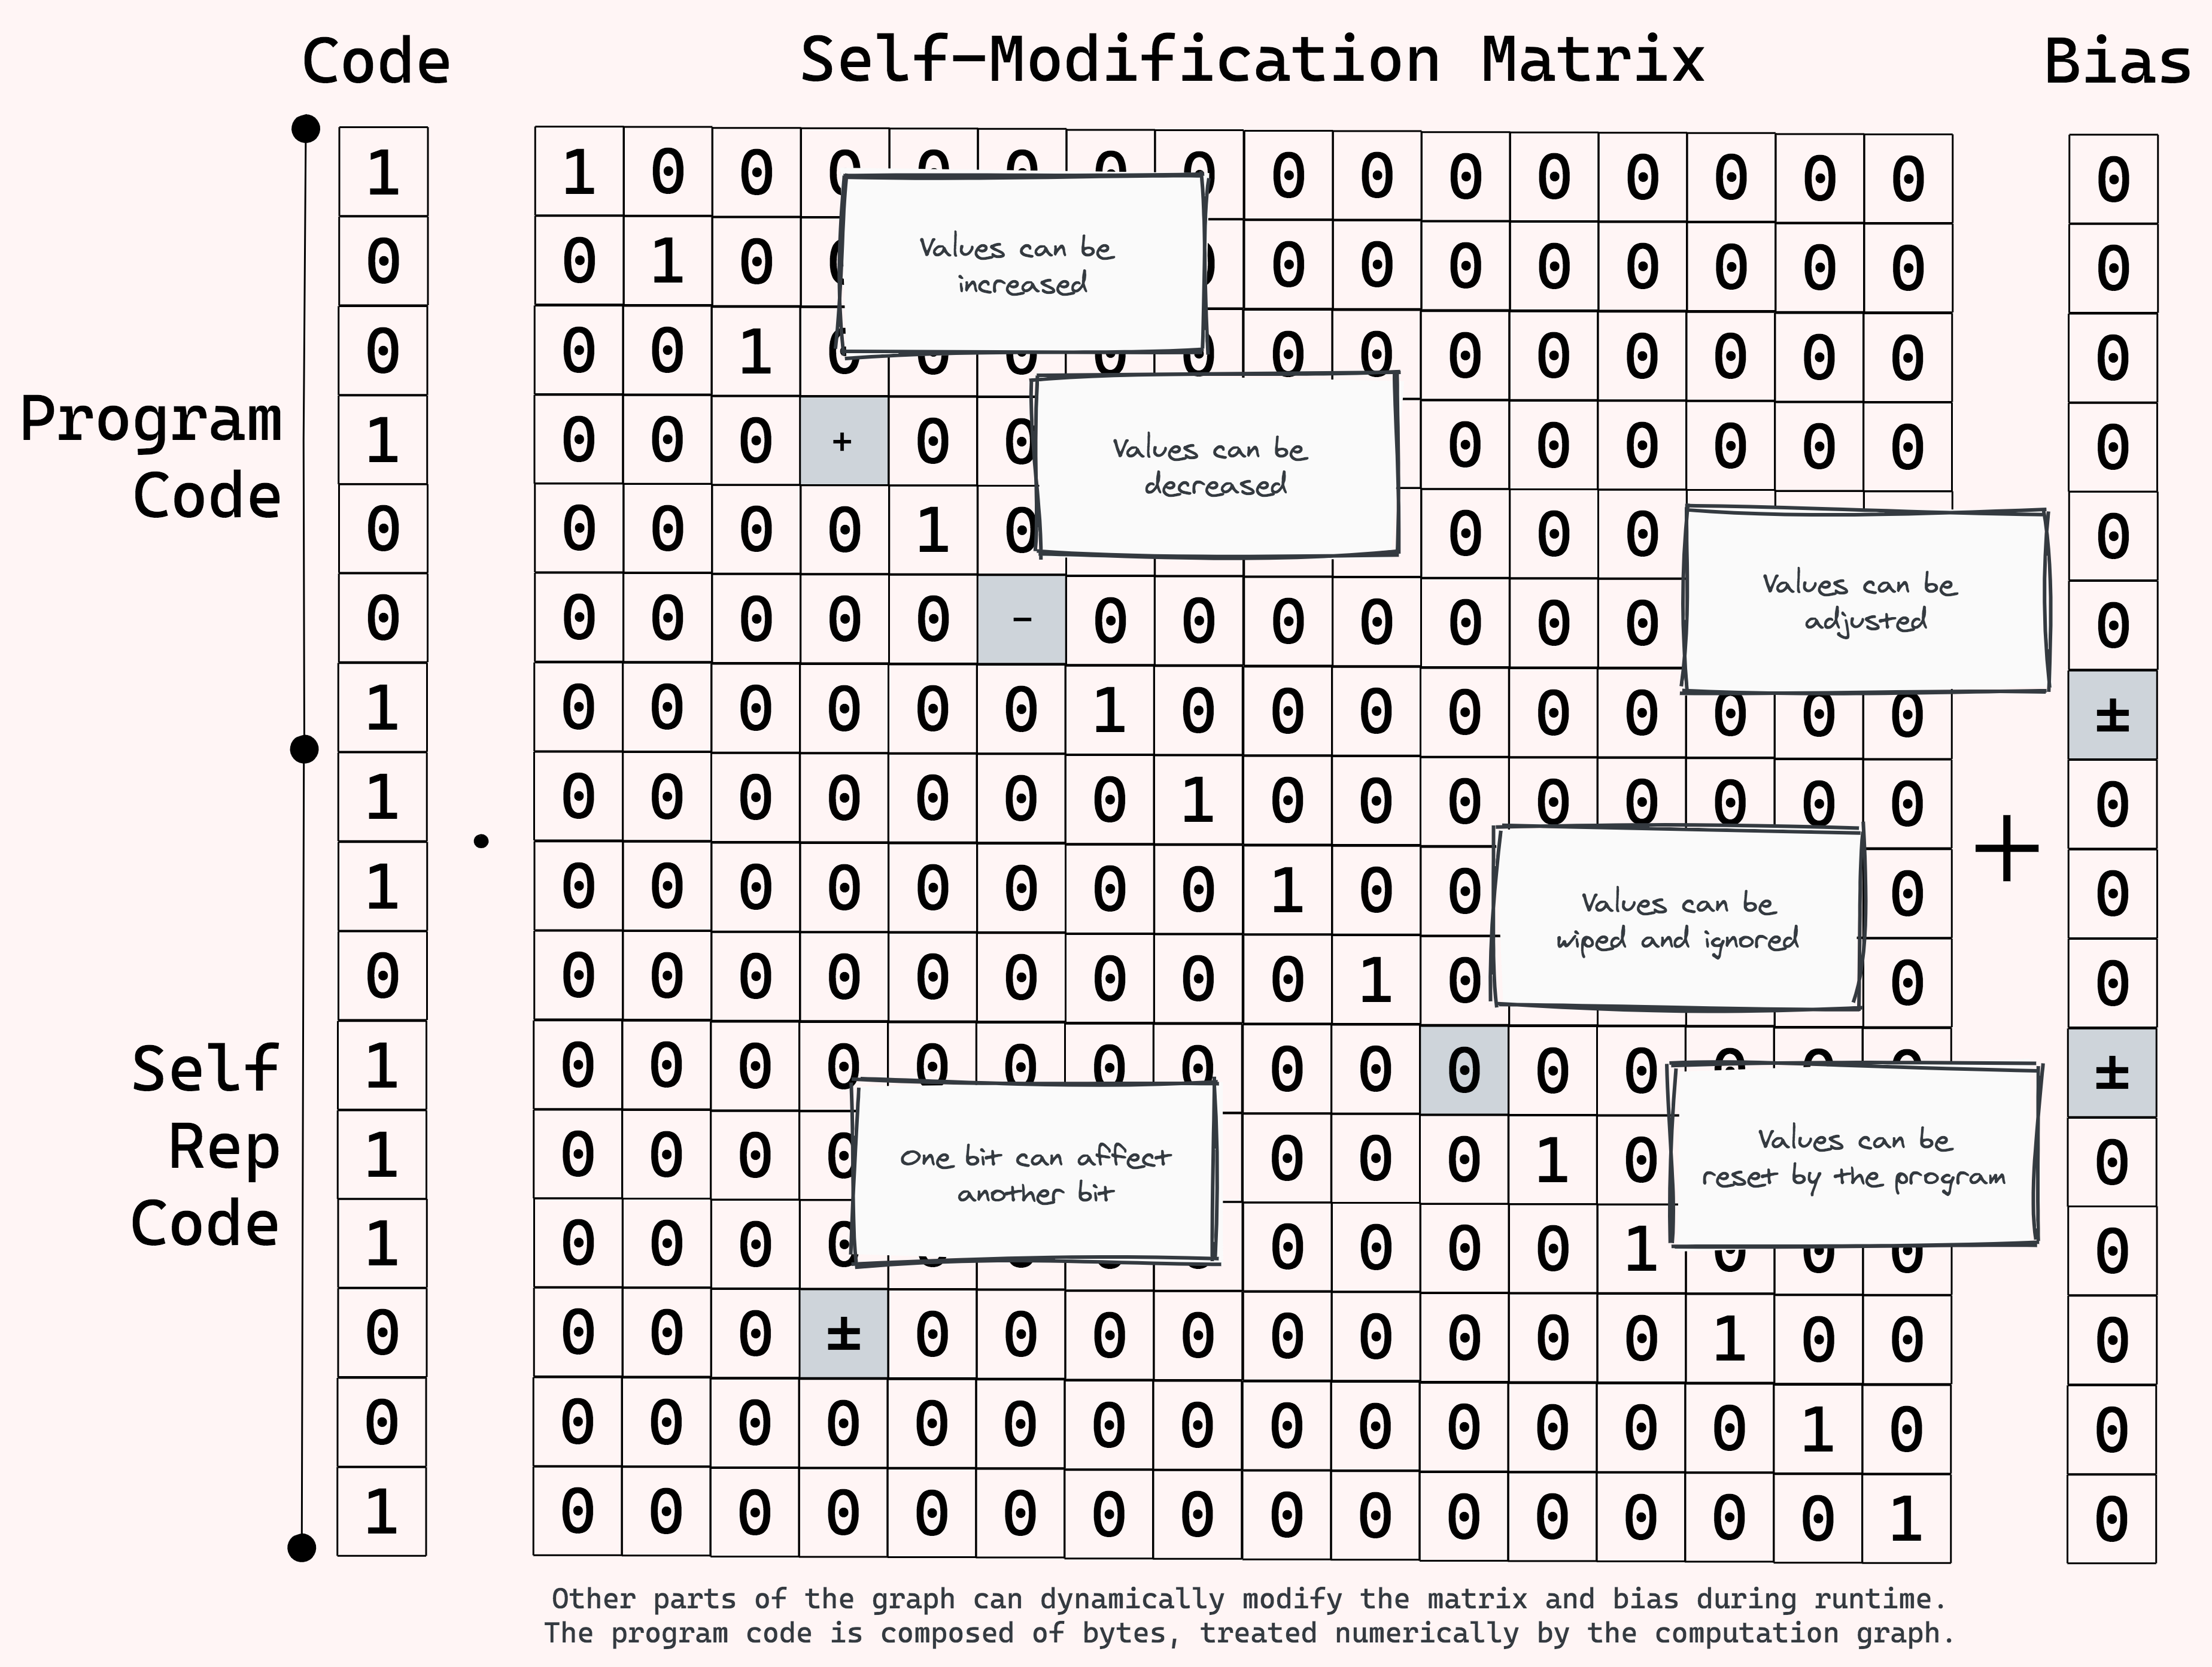 A self-modification matrix is multiplied by the program’s compressed code and a bias vector is added, resulting in a modified compressed code that can be used by an interpreter to build the modified program. The bytes in the program’s compressed code are treated numerically by the matrix. Their value can be increased, decreased, amplified, shifted, ignored, and reset. Any part of the computation graph can intentionally and conditionally change parts of the self-modification matrix during runtime, resulting in dynamic and adaptive self-replication capabilities.